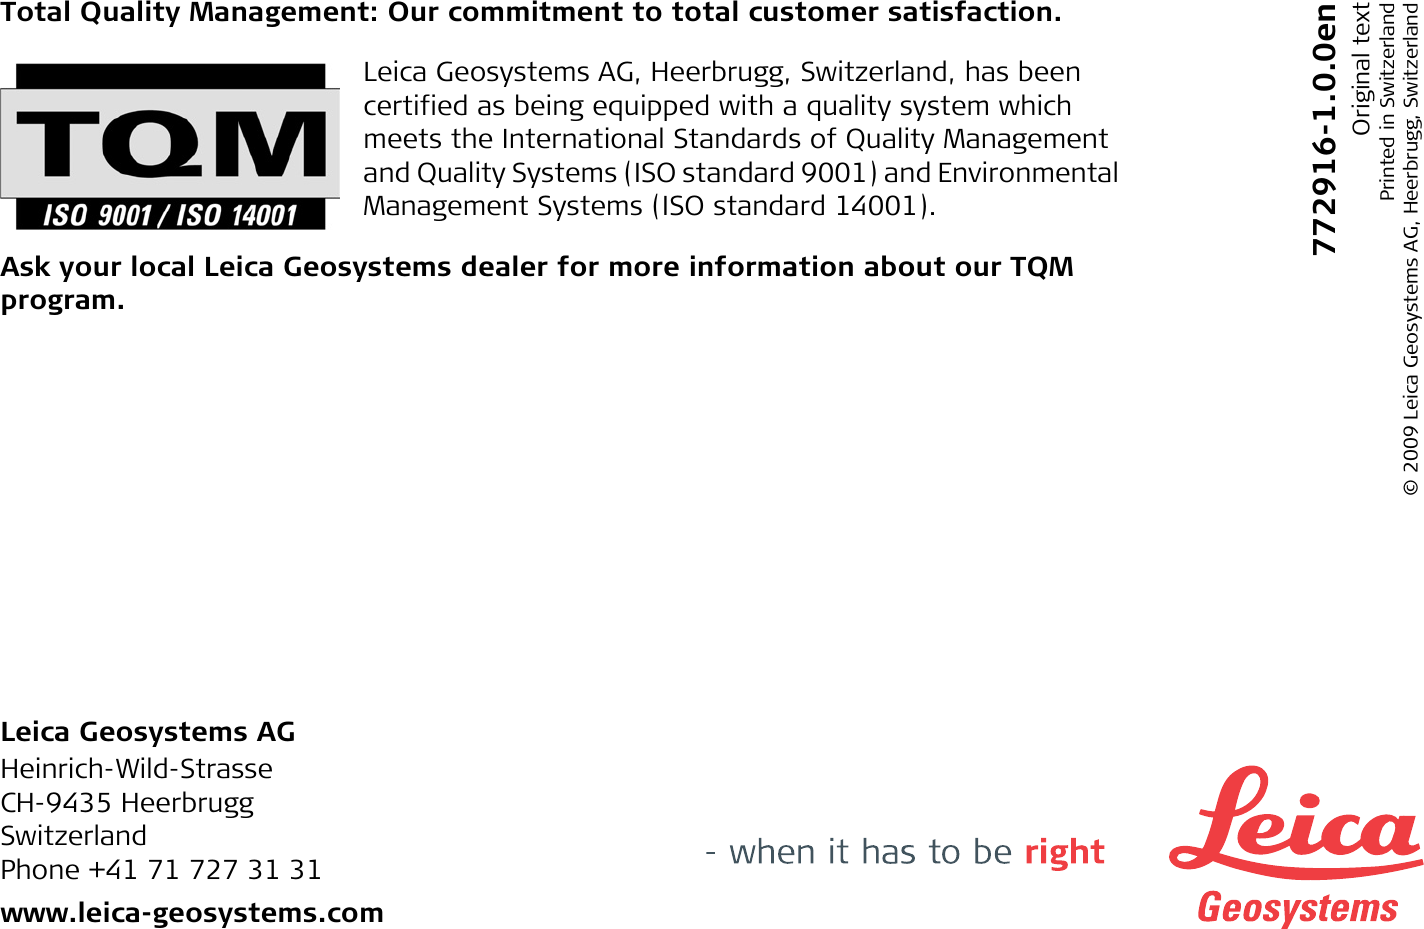 Total Quality Management: Our commitment to total customer satisfaction.Leica Geosystems AG, Heerbrugg, Switzerland, has been certified as being equipped with a quality system which meets the International Standards of Quality Management and Quality Systems (ISO standard 9001) and Environmental Management Systems (ISO standard 14001).Ask your local Leica Geosystems dealer for more information about our TQM program.Leica Geosystems AGHeinrich-Wild-StrasseCH-9435 HeerbruggSwitzerlandPhone +41 71 727 31 31www.leica-geosystems.com772916-1.0.0enOriginal textPrinted in Switzerland © 2009 Leica Geosystems AG, Heerbrugg, Switzerland